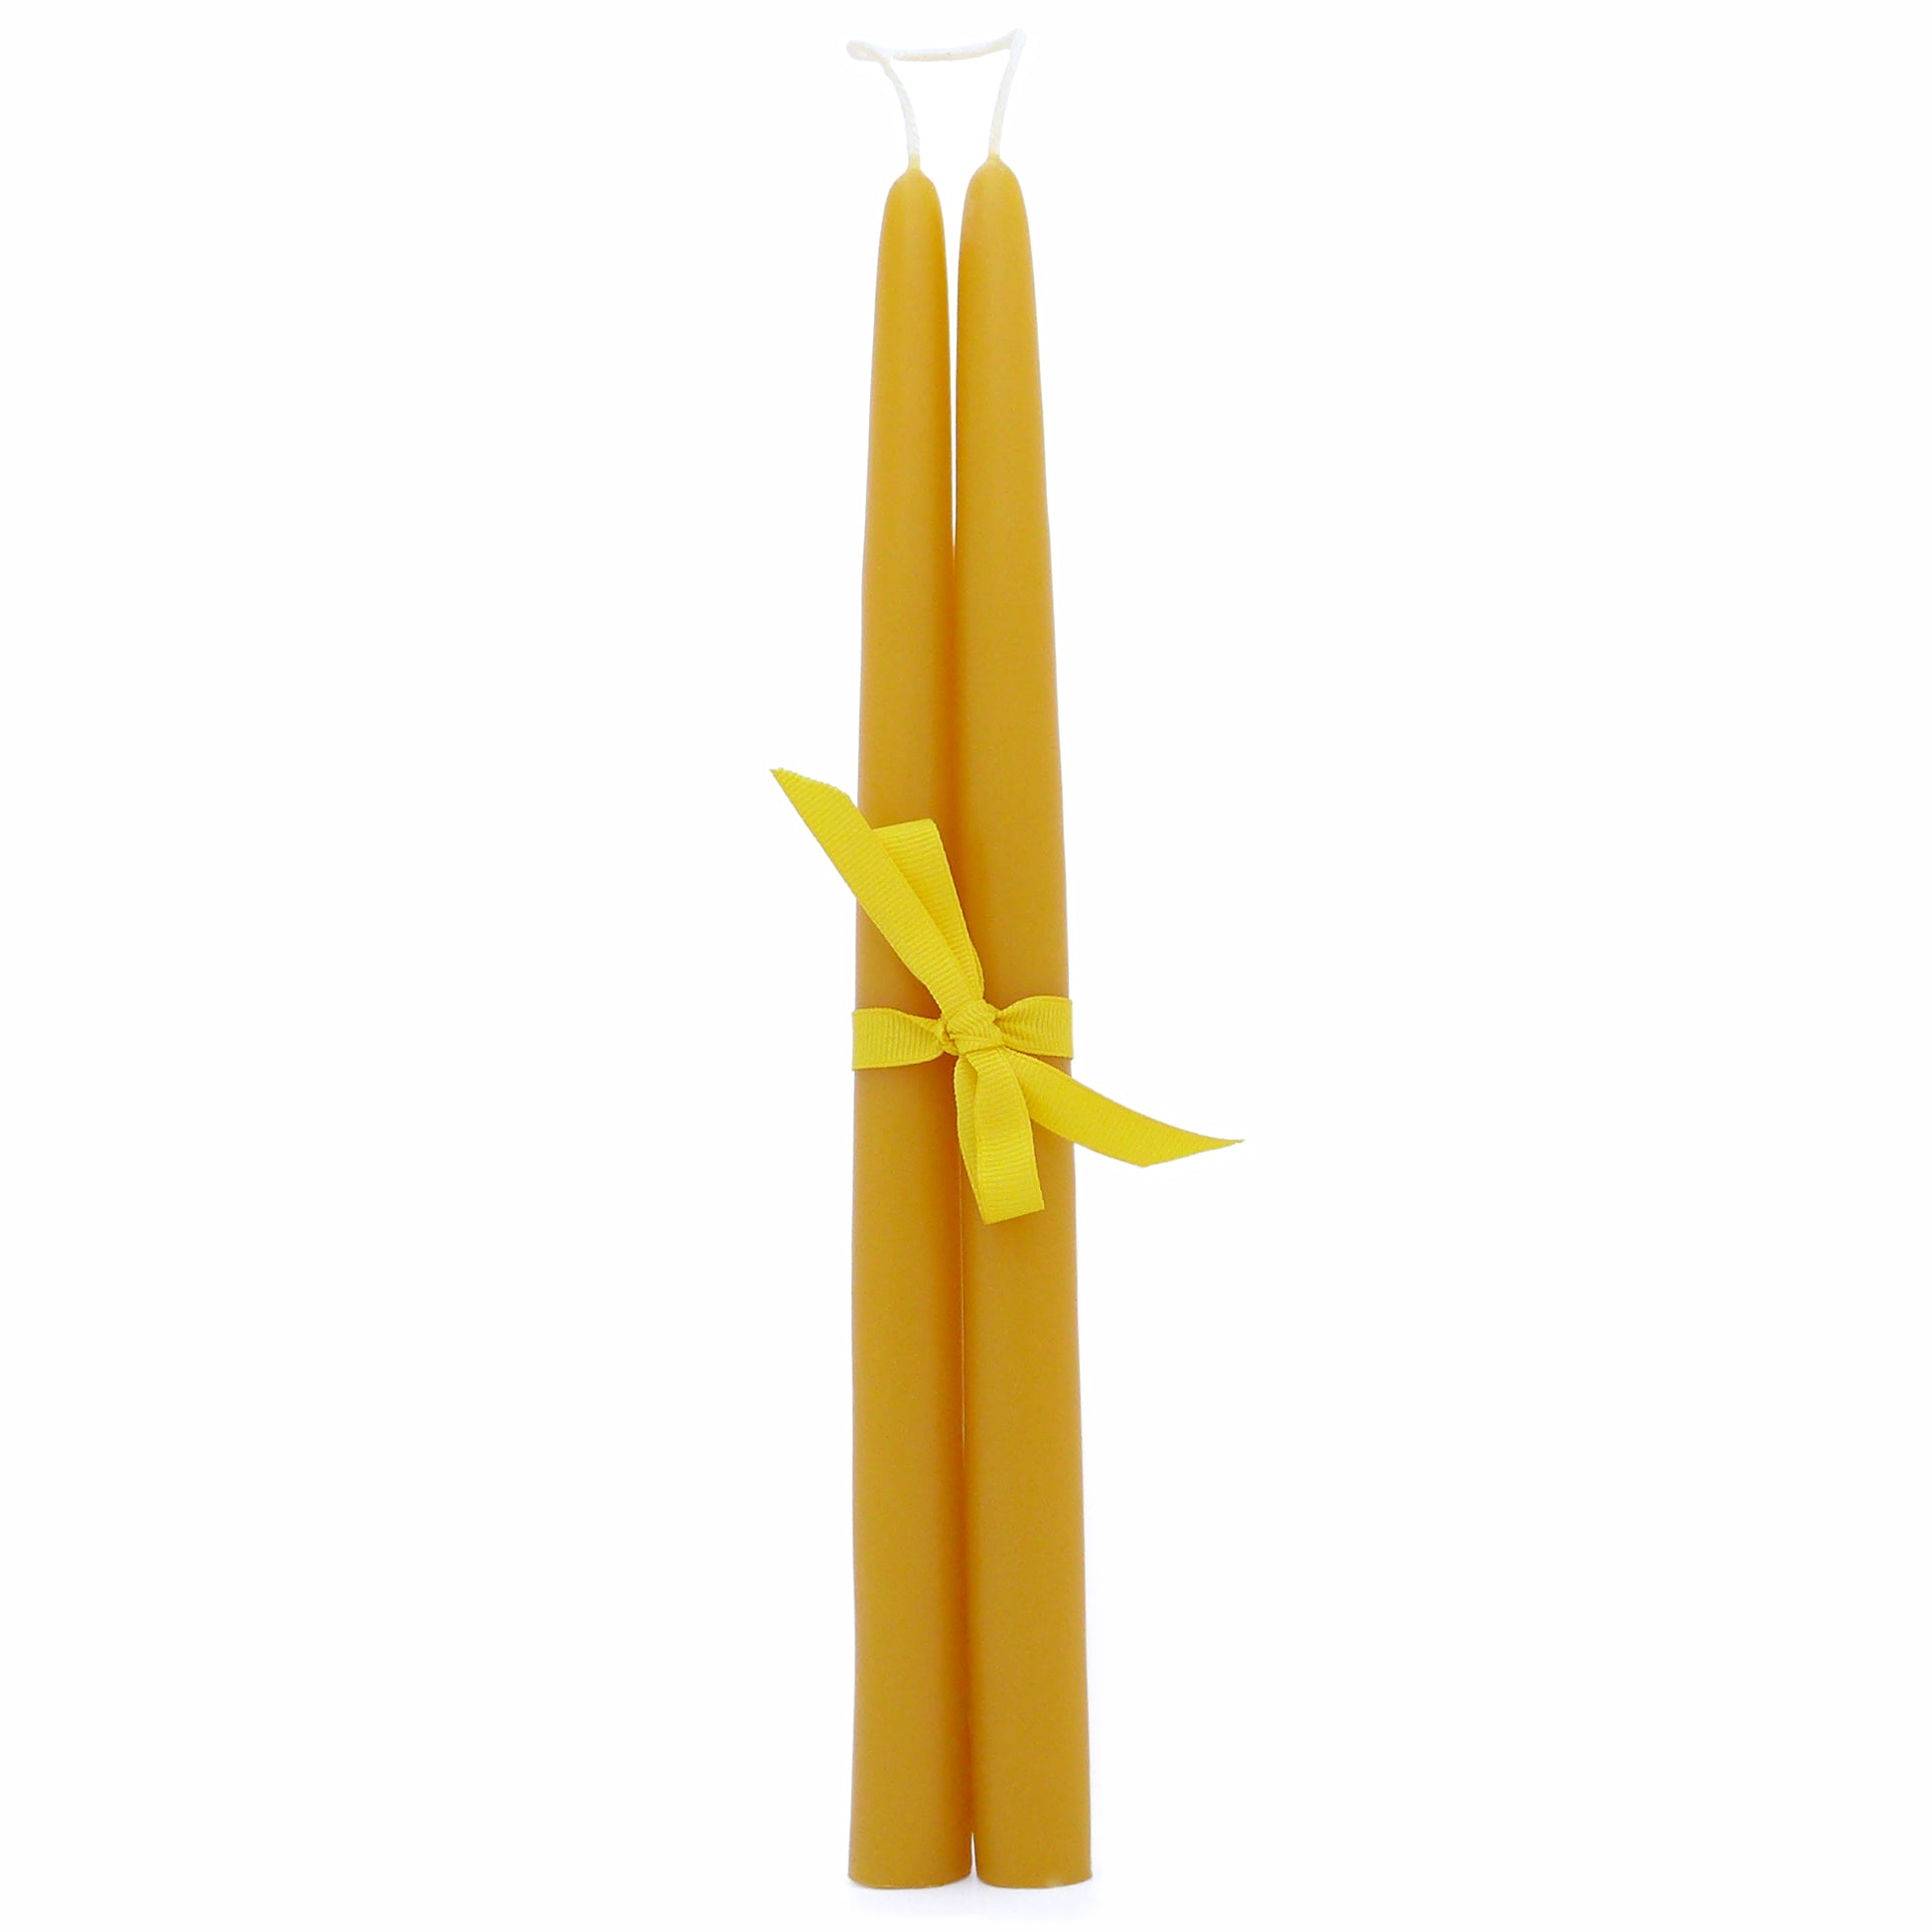 Beeswax Taper Candles - Clapham's